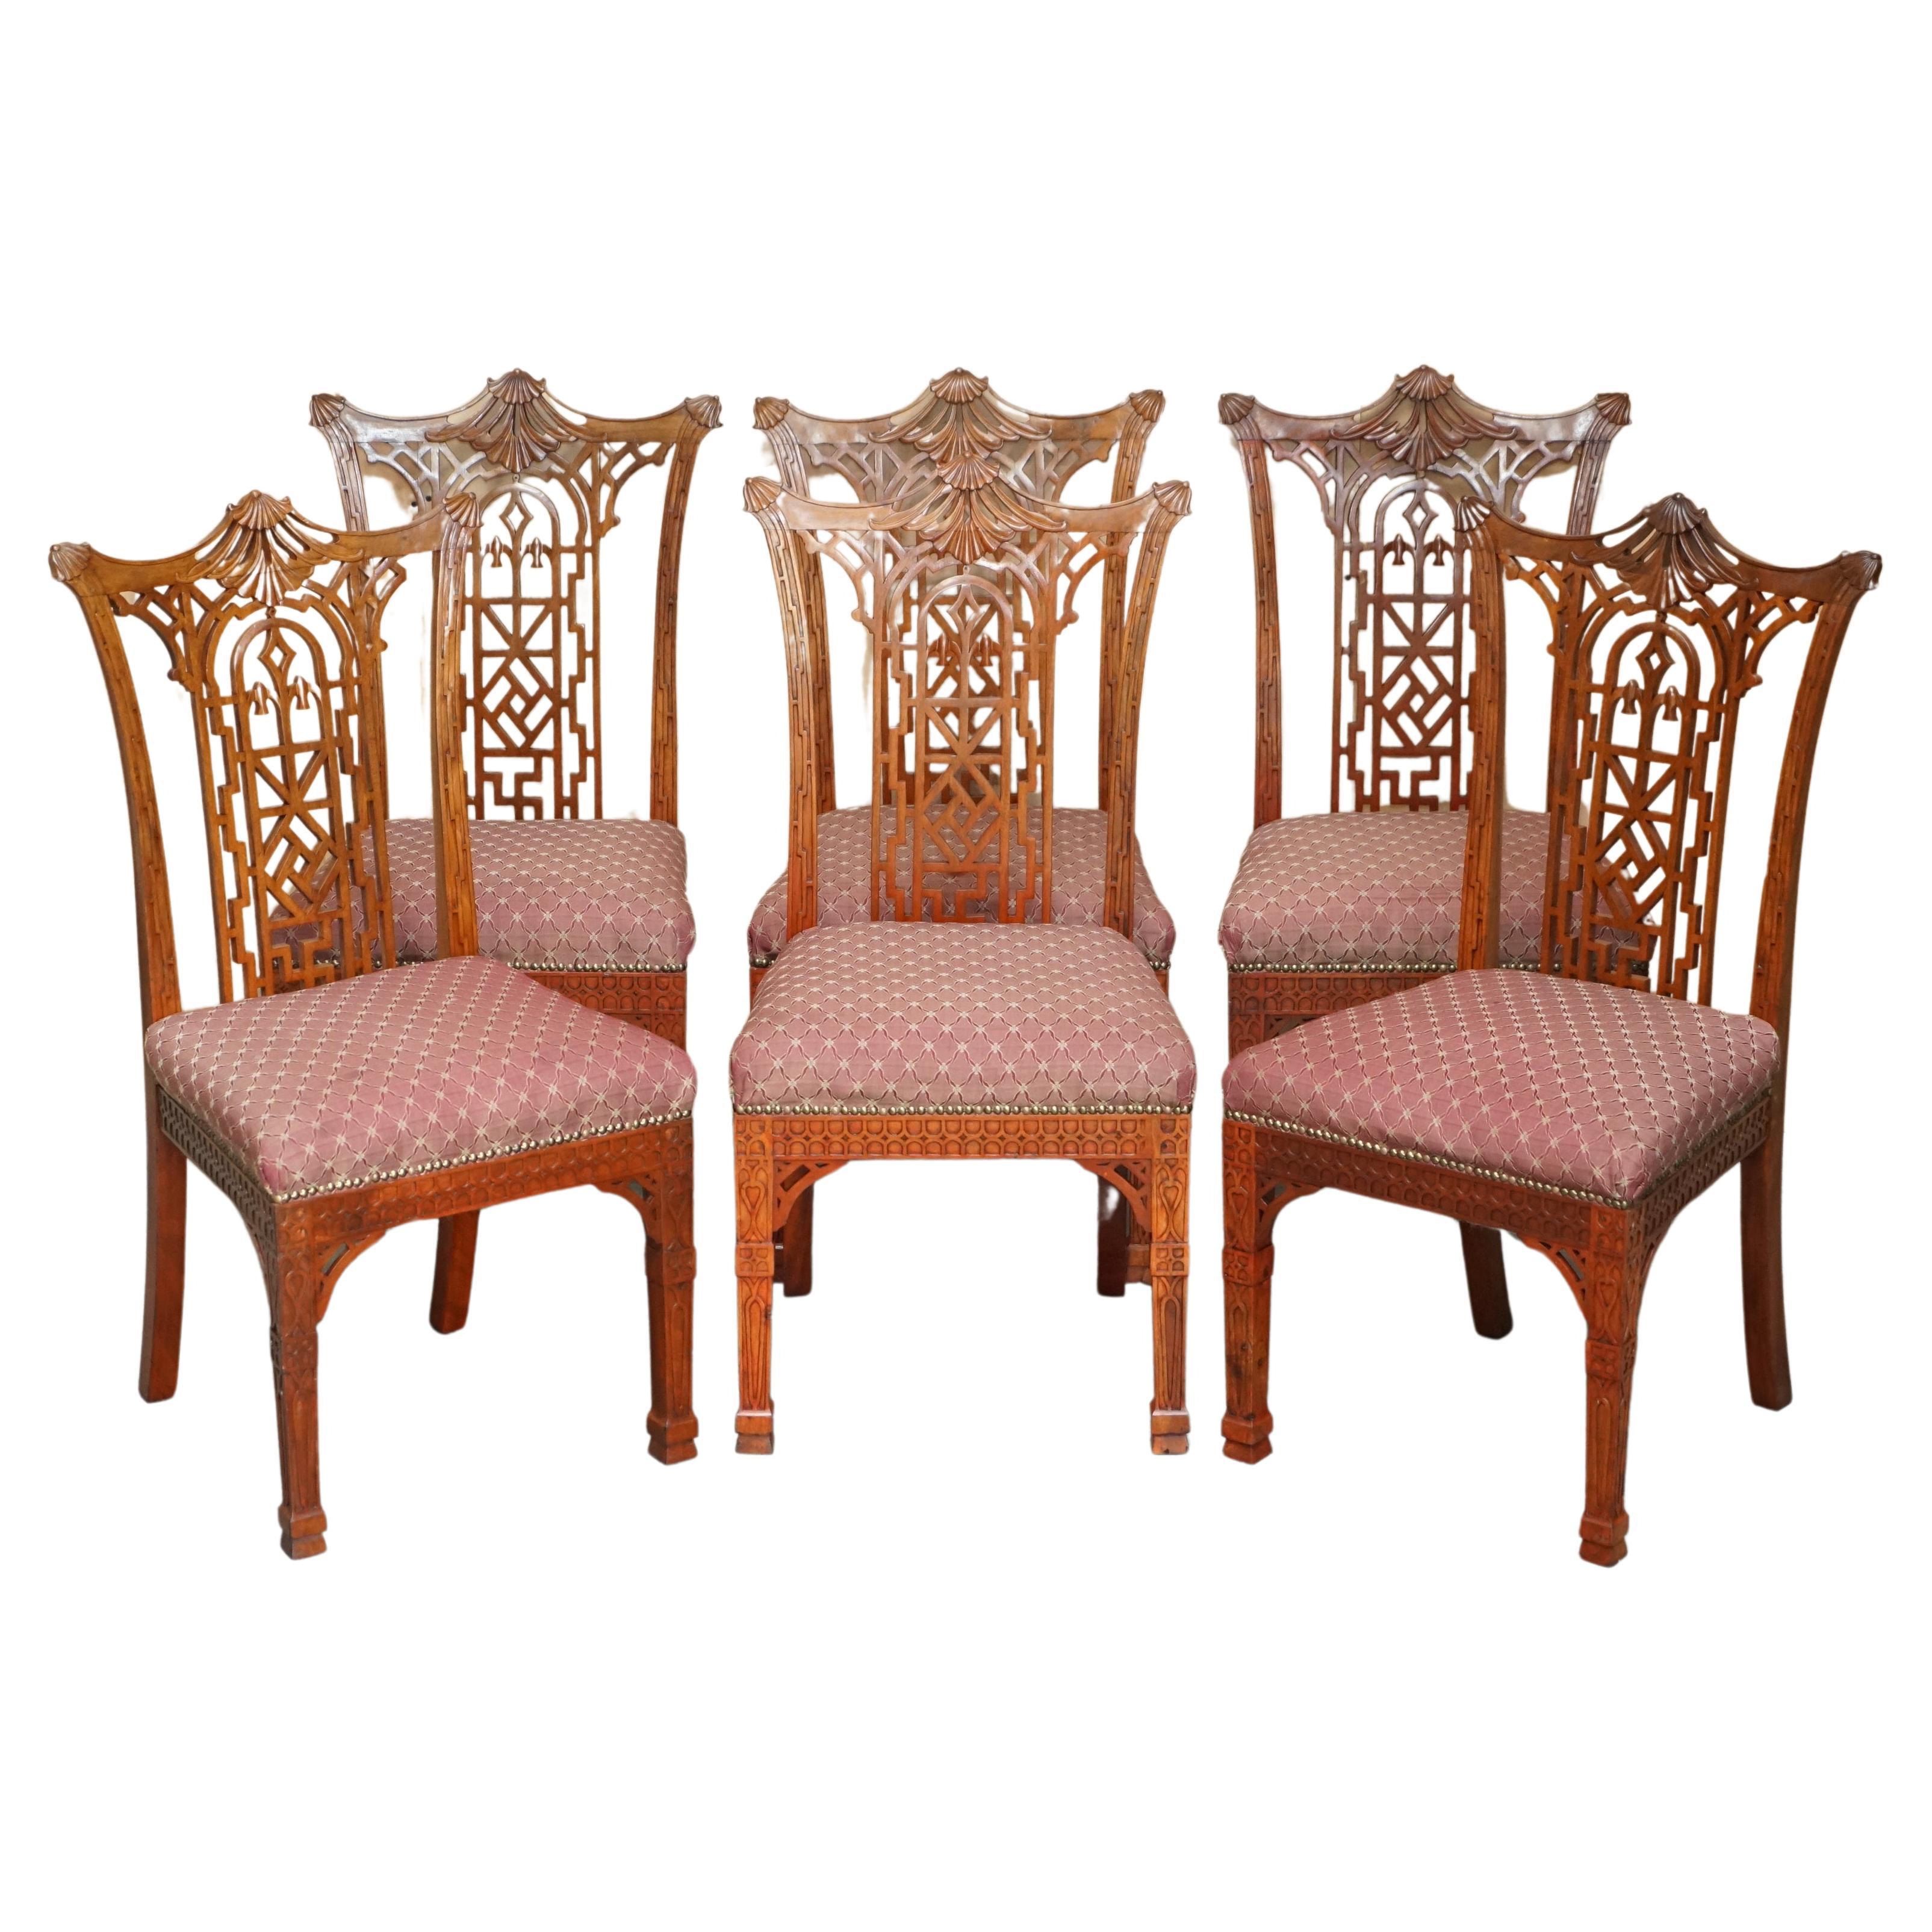 SIX EXQUISITE ViNTAGE THOMAS CHIPPENDALE CHINESE PAGODA TOP DINING CHAIRS For Sale